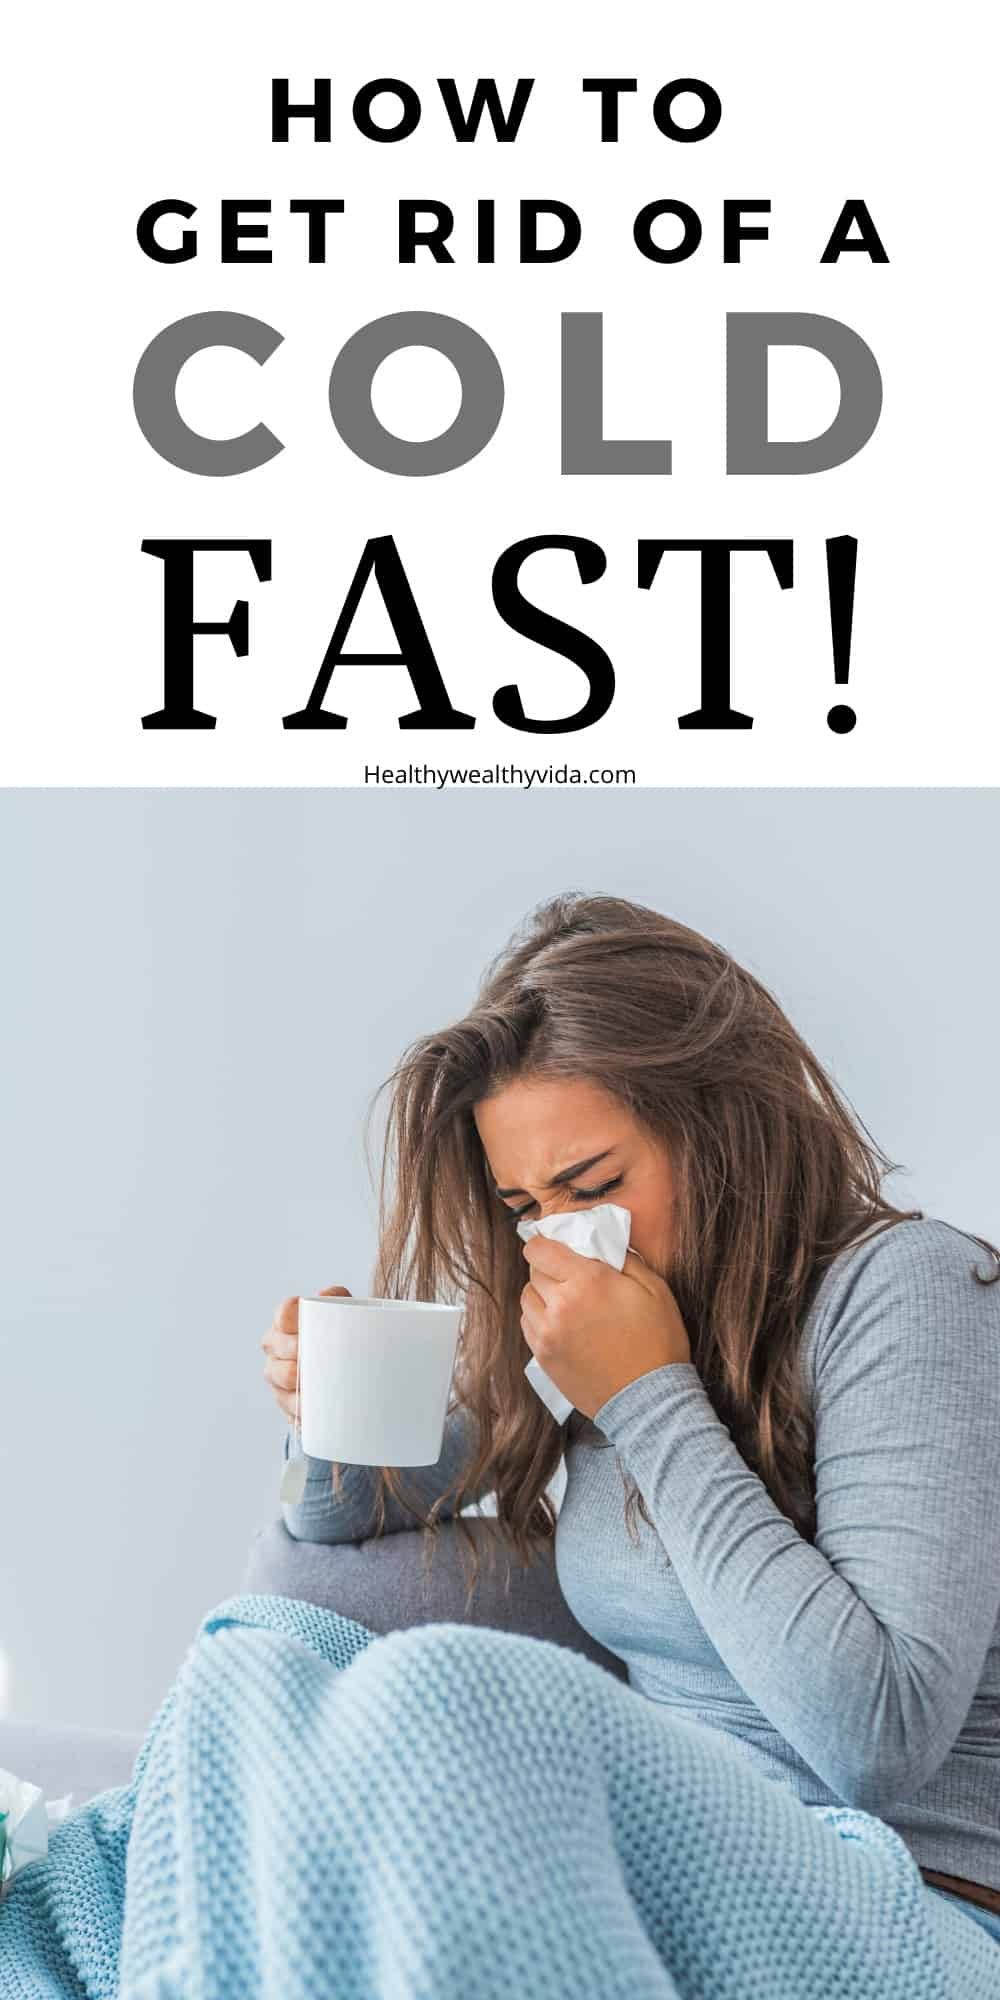 How To Get Rid Of A Cold (FAST)